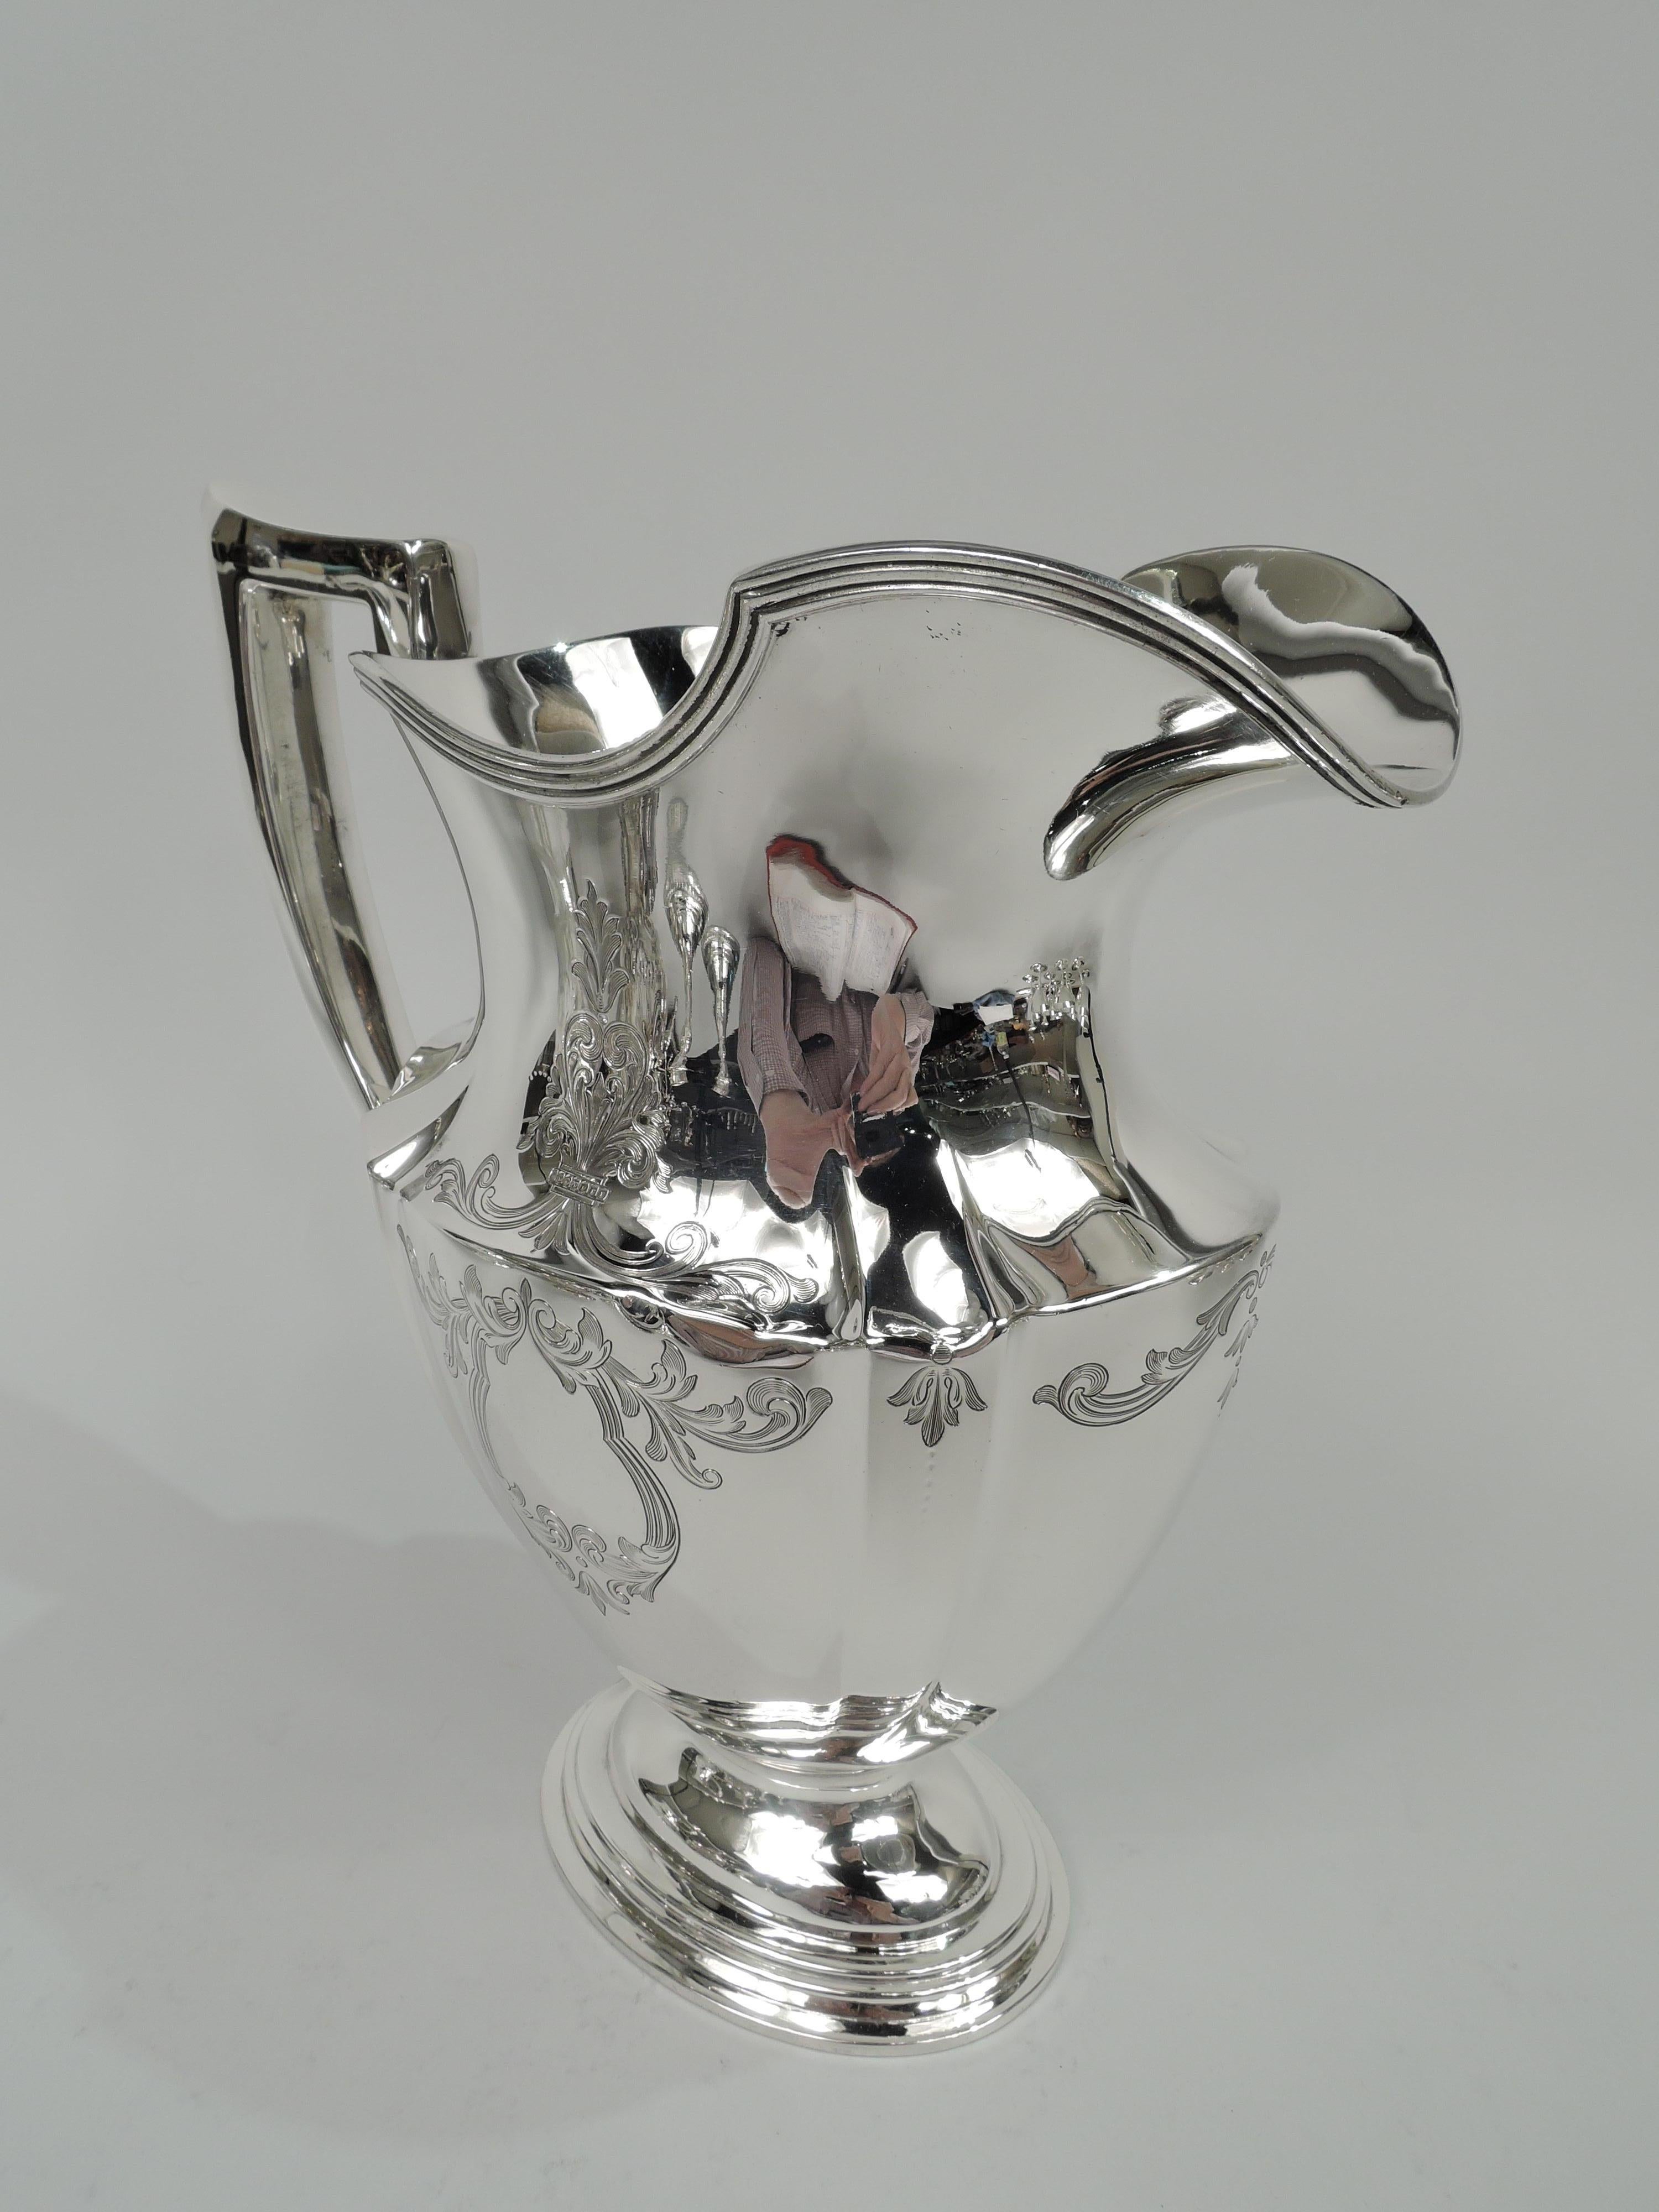 Engraved Plymouth sterling silver water pitcher. Made by Gorham in Providence in 1911. Tapering and paneled ovoid body, reeded helmet mouth, capped scroll bracket handle, and stepped oval foot. Leafing scrollwork and two cartouches (vacant). Fully